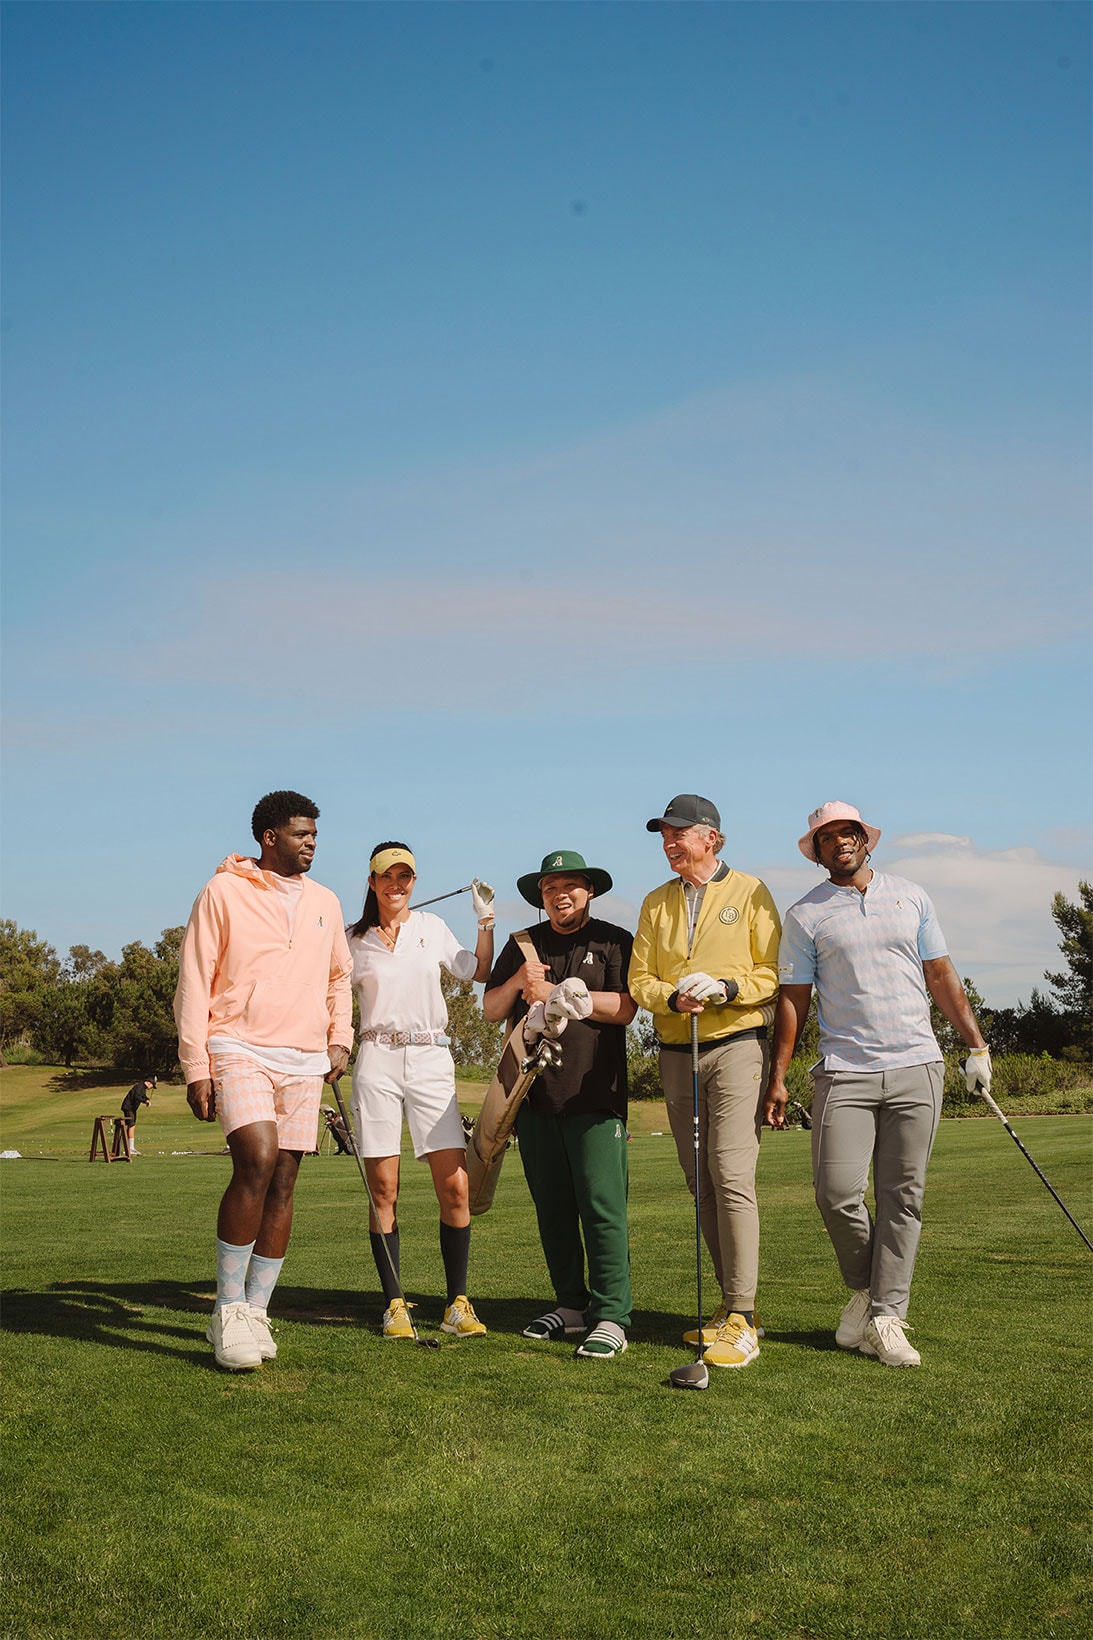 Happy Gilmore x Extra Butter: The stylish capsule celebrates the